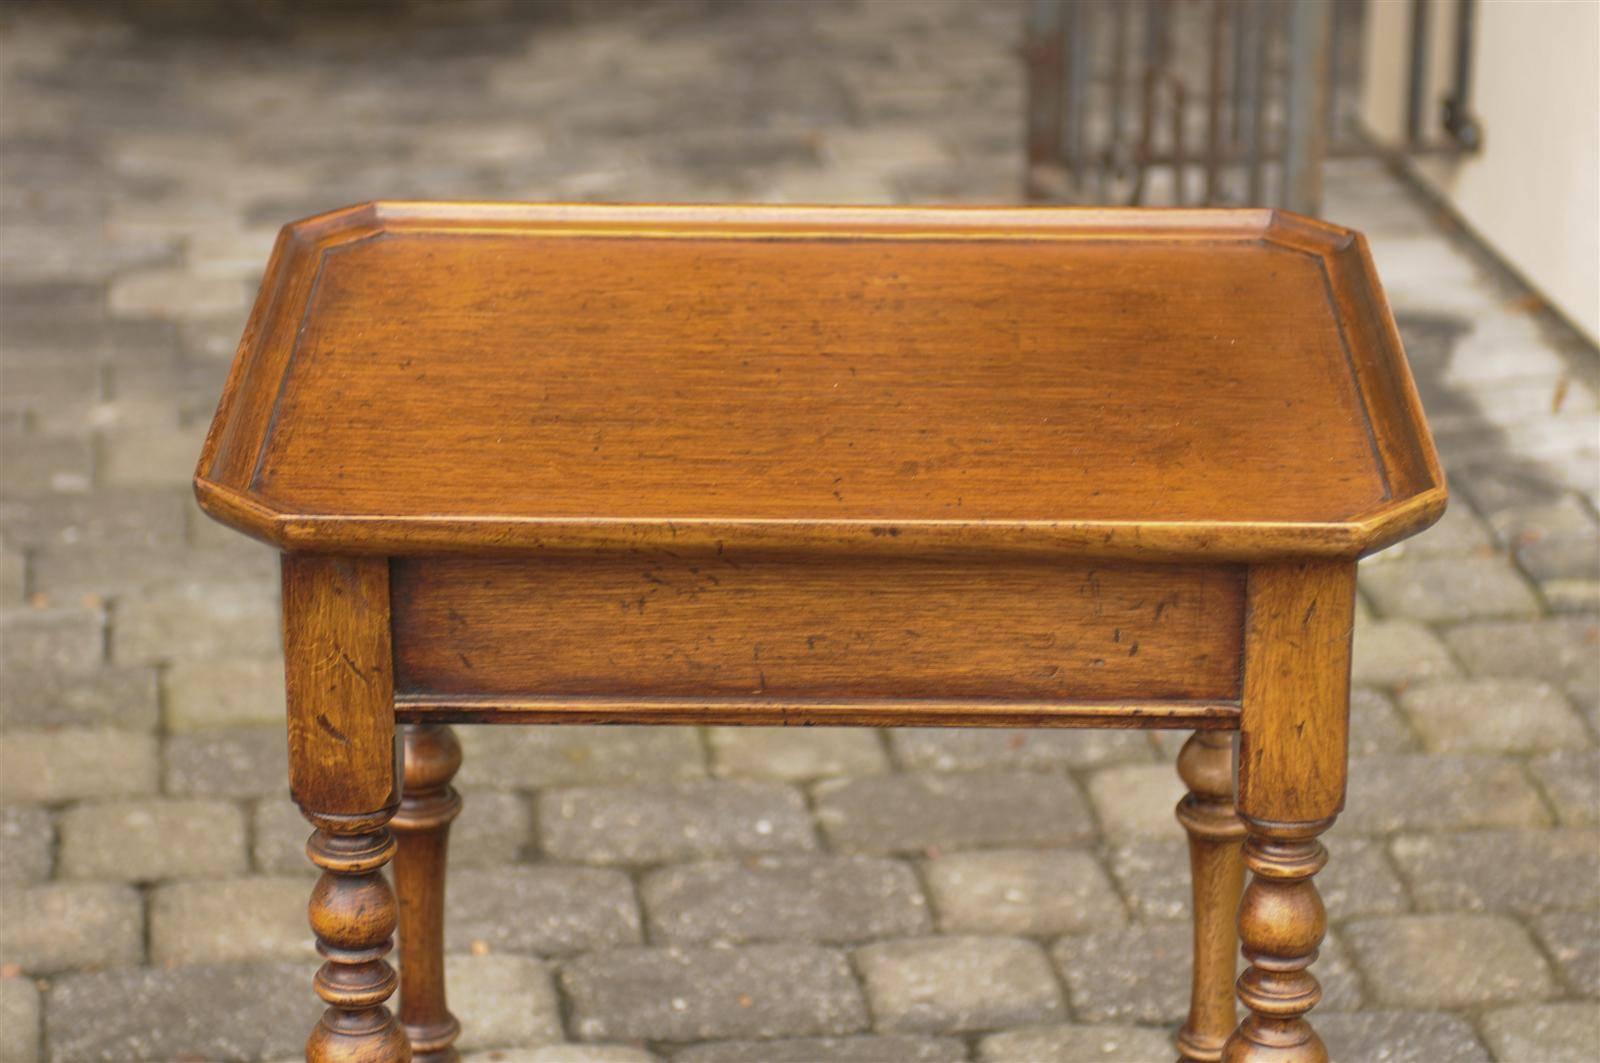 20th Century French Turn of the Century Side Table with Single Drawer and Exquisite Stretcher